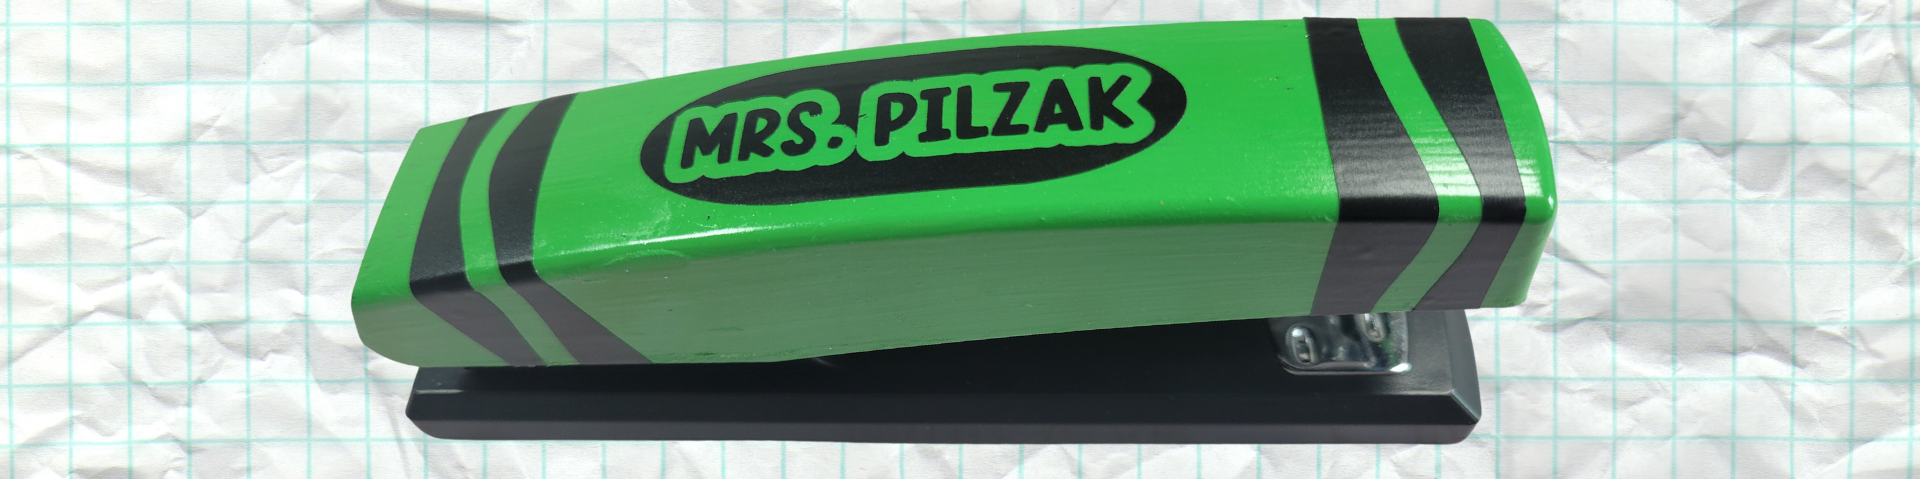 DIY Personalized Staplers For Teachers with Cricut Vinyl